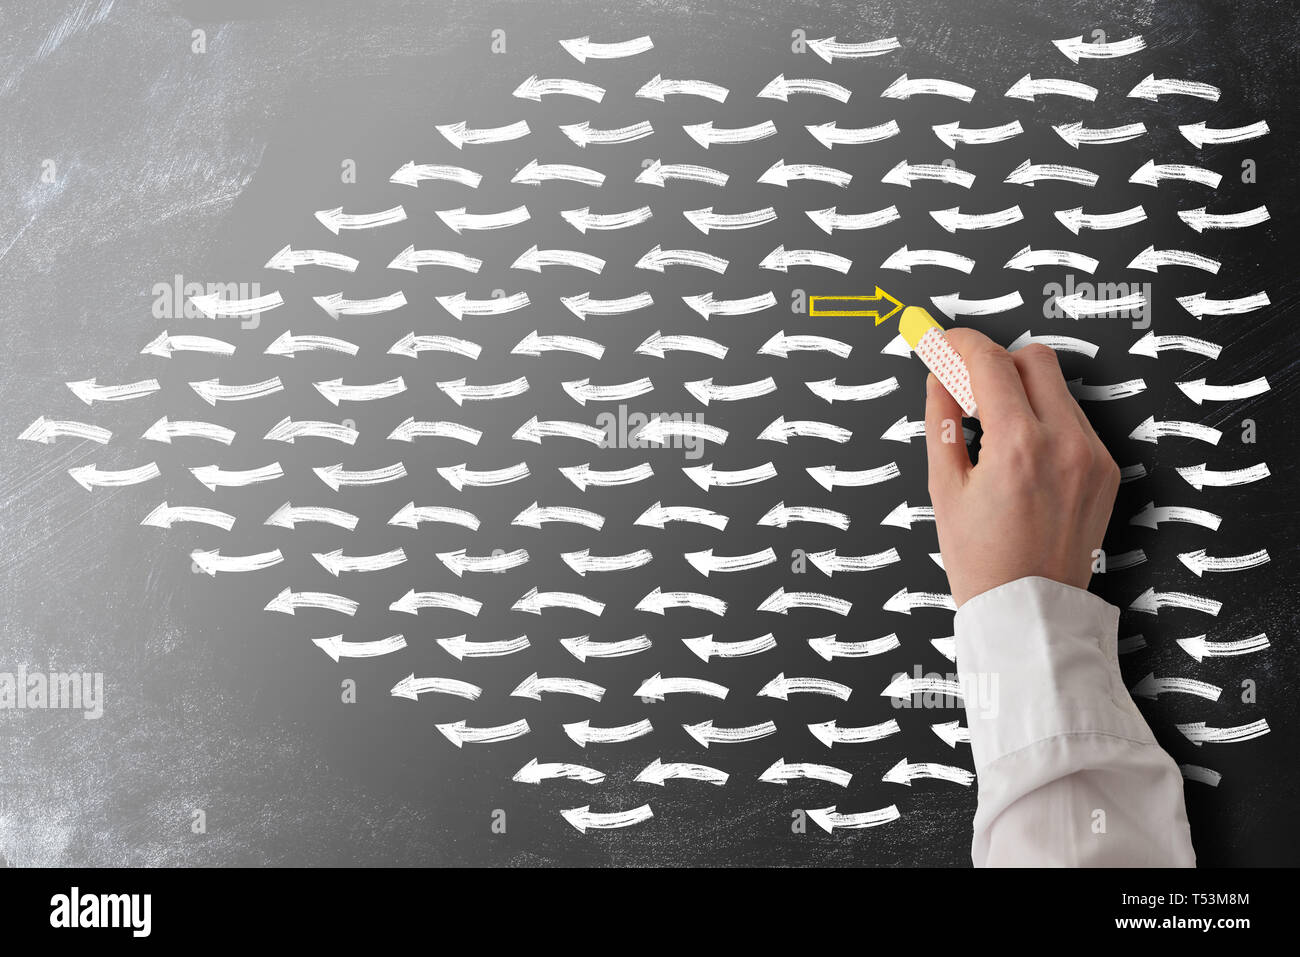 striving against the stream or swim against the tide concept with arrows on blackboard Stock Photo